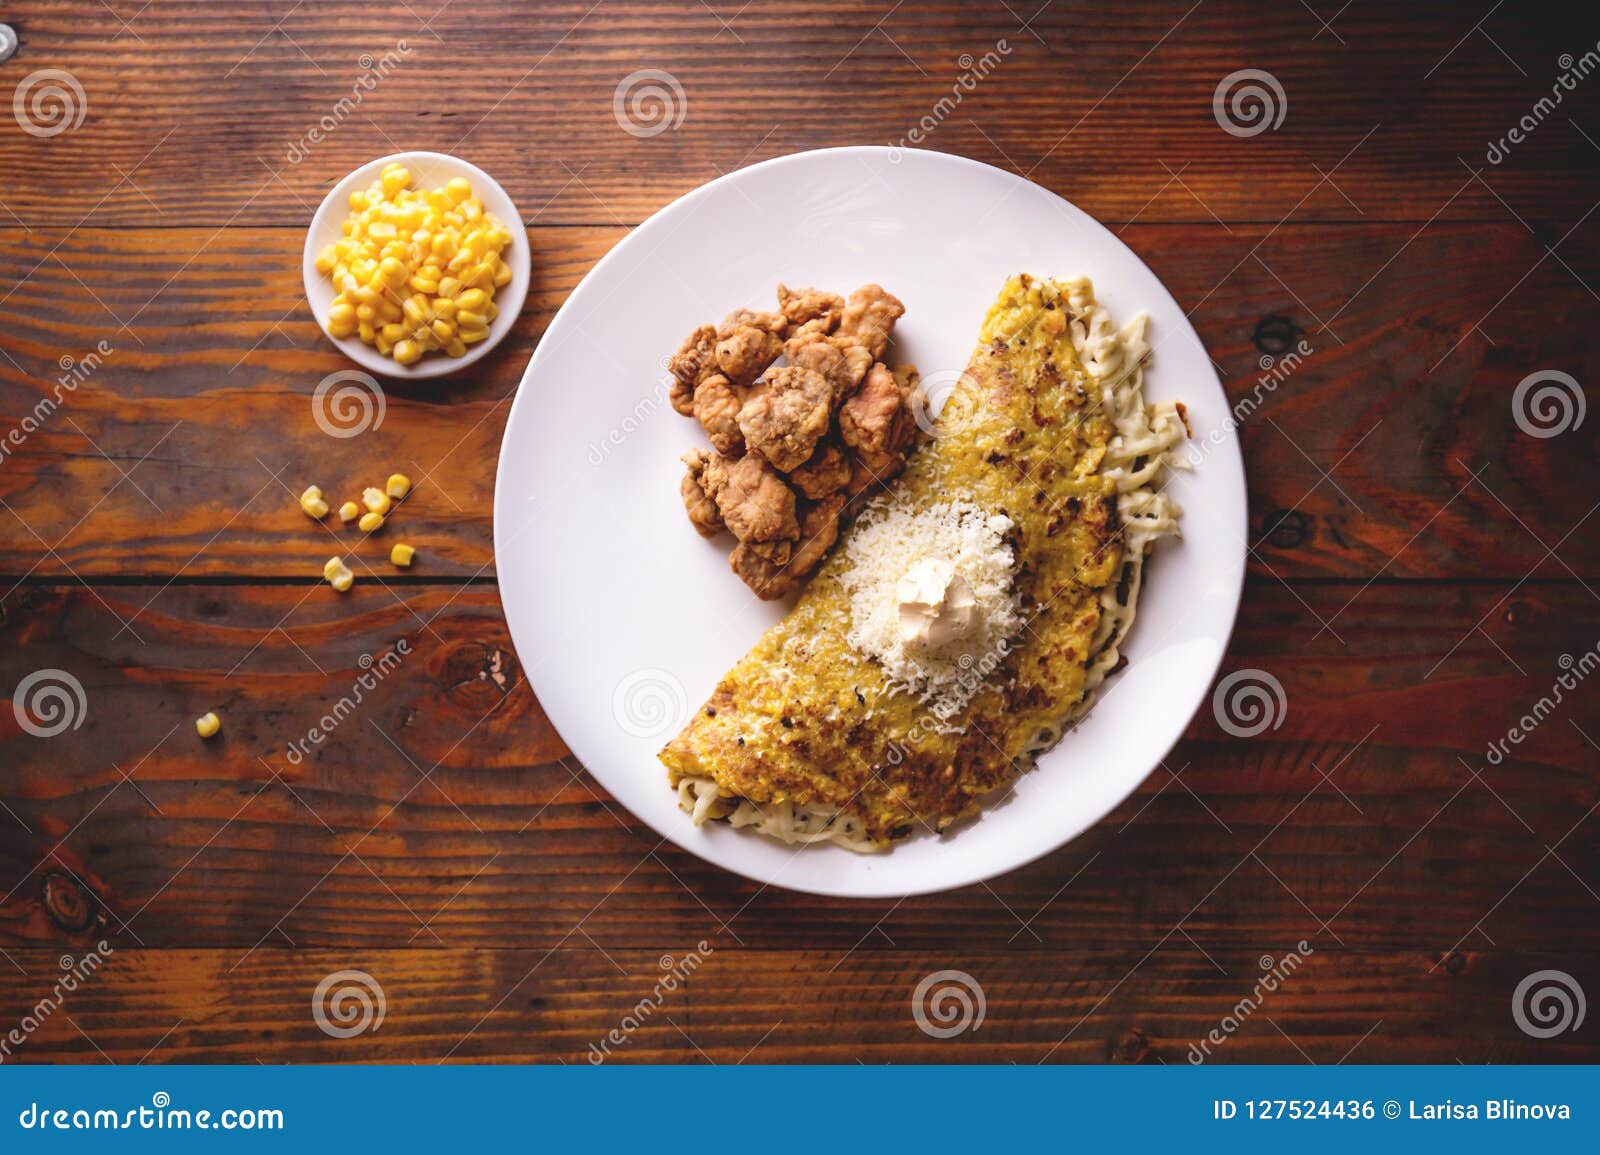 venezuelan food. corn cachapa with cheese and fried pork - cochino frito. wooden background, top view